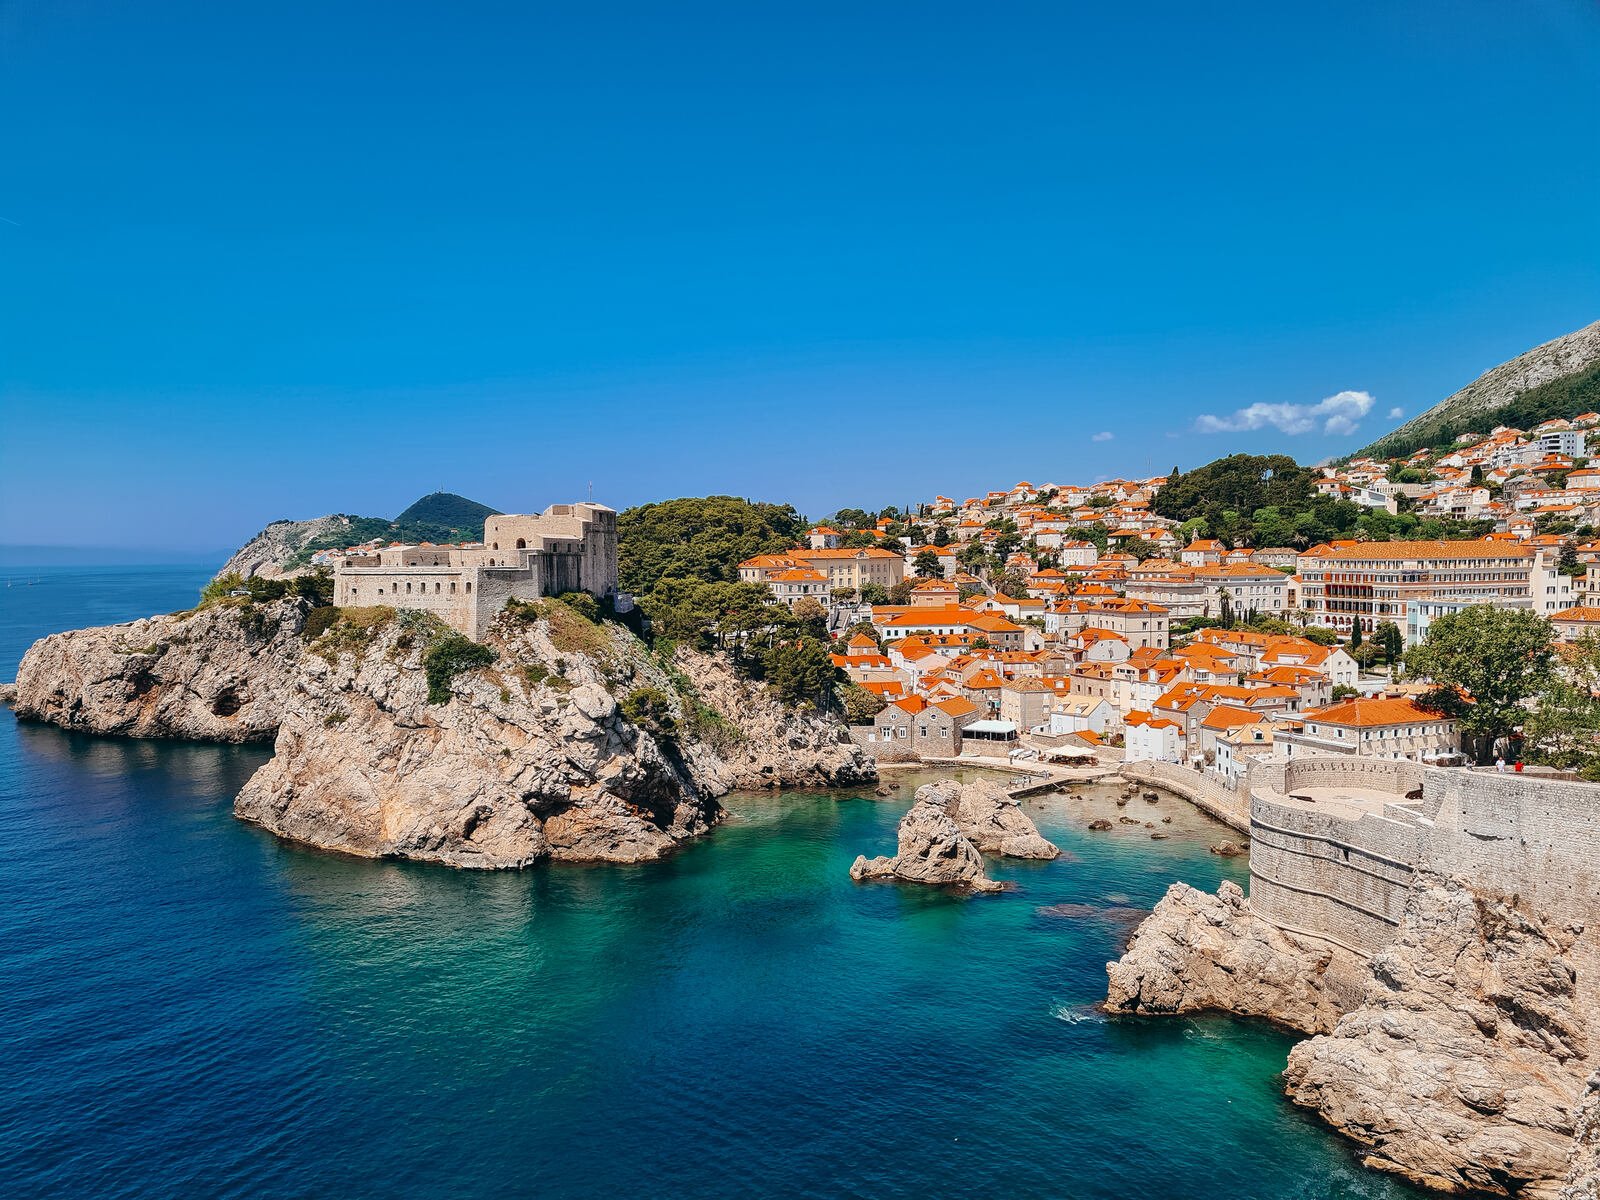 a sea fortress on a rocky cliff with the old town of Dubrovnik in the background